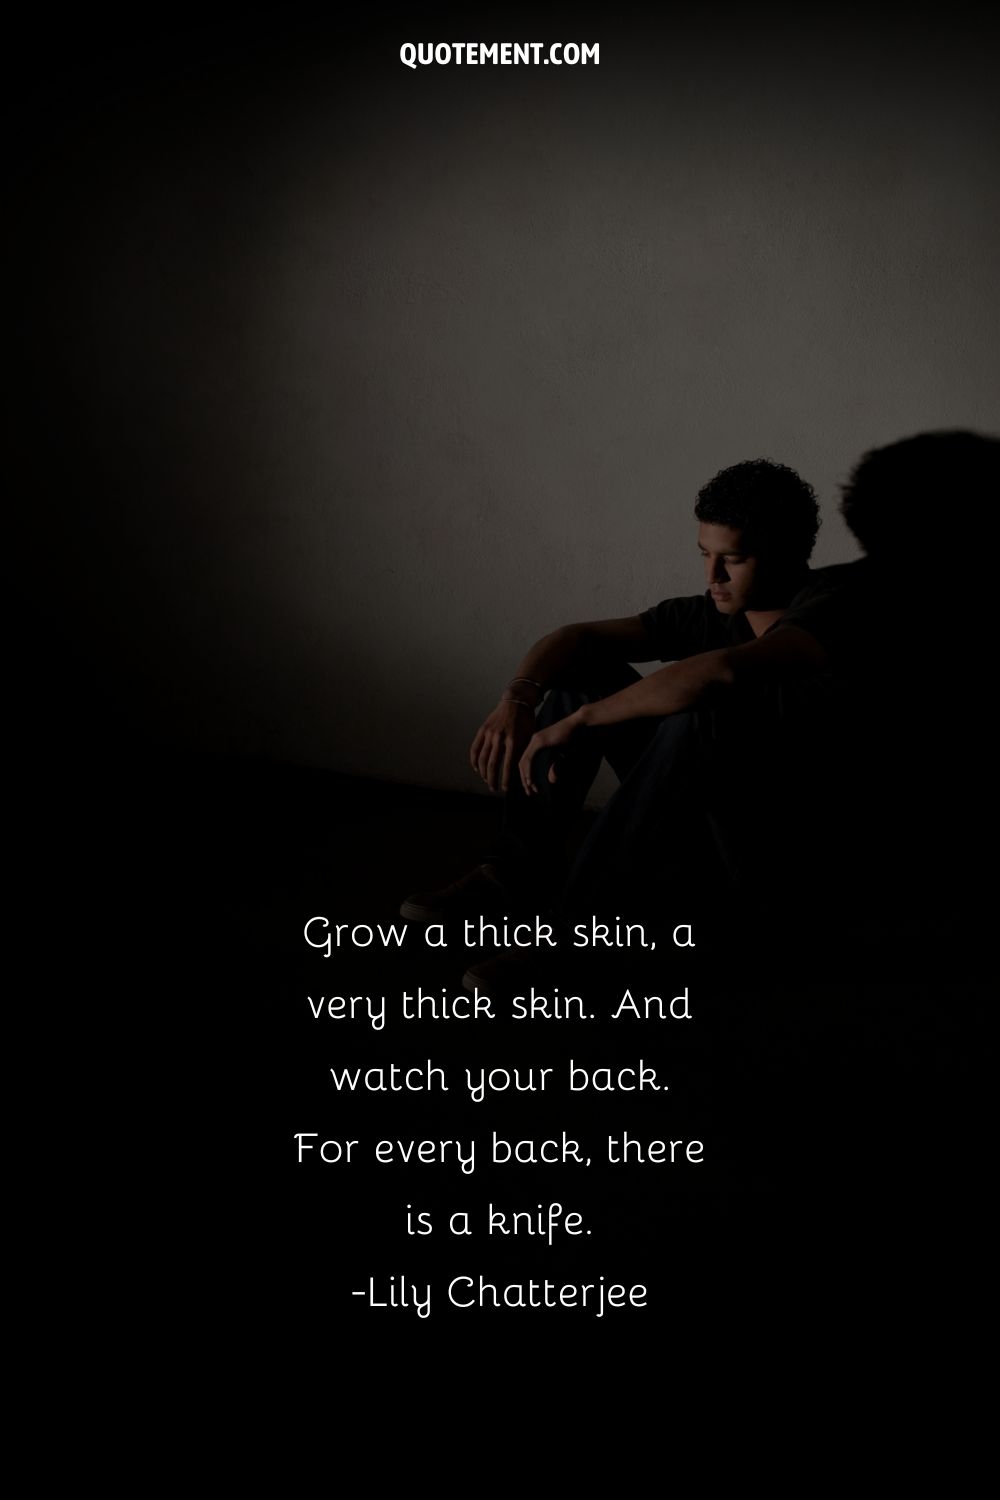 Grow a thick skin, a very thick skin. And watch your back. For every back, there is a knife